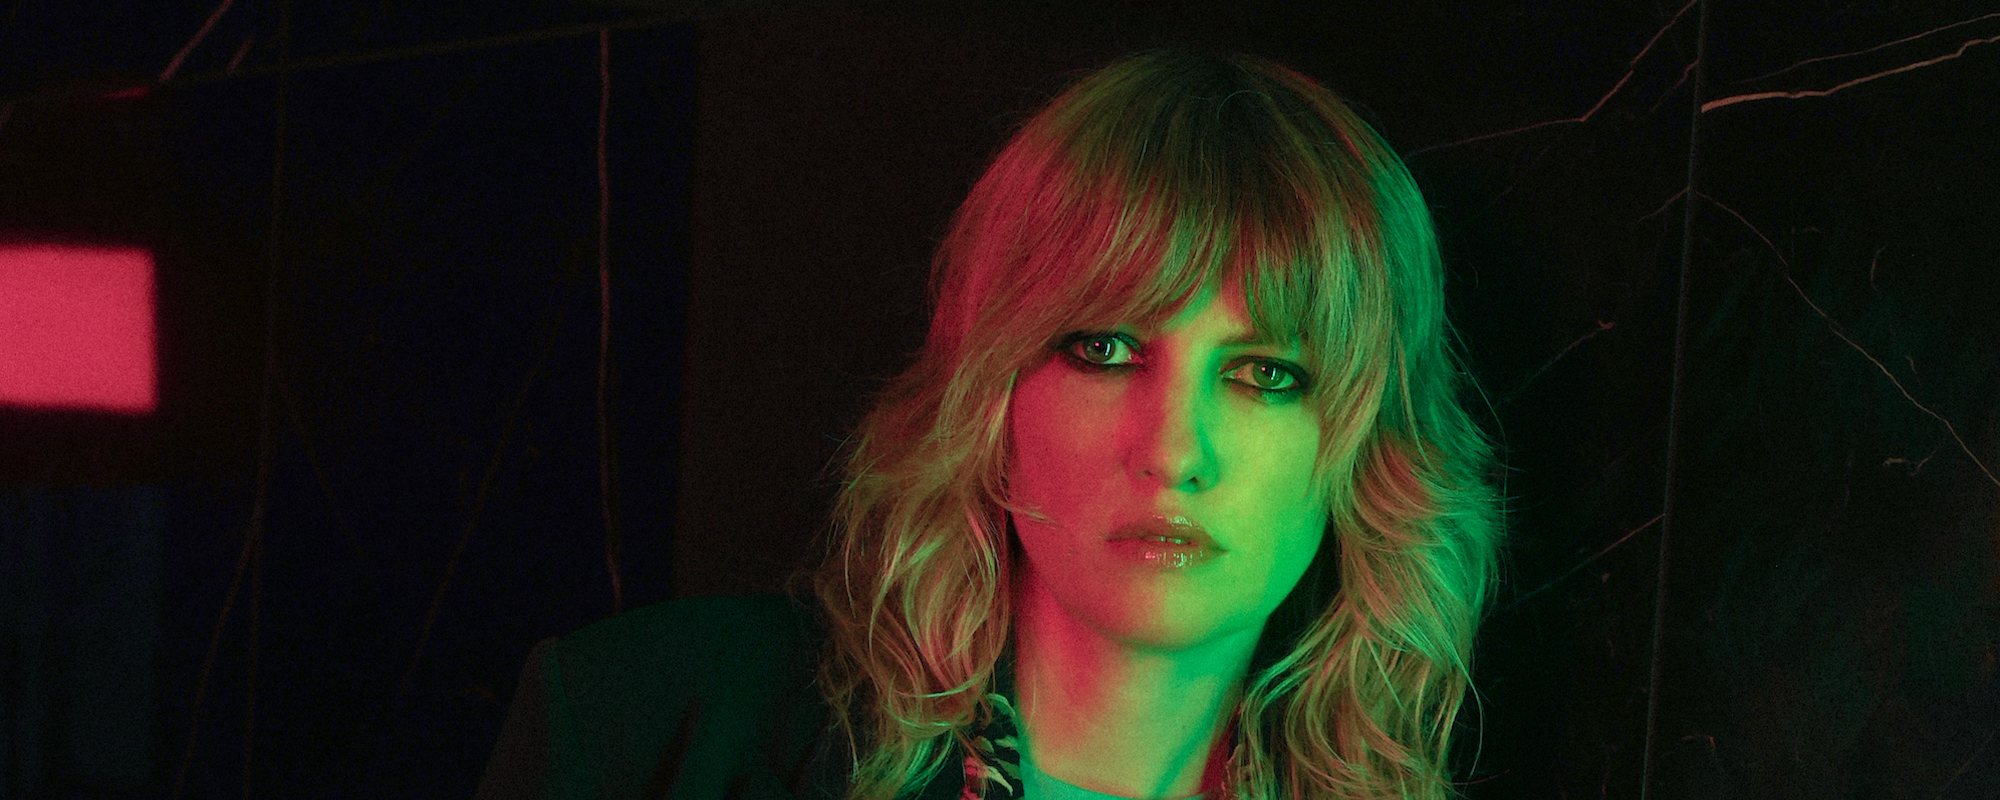 Ladyhawke Faces Days Past on ‘Time Flies’